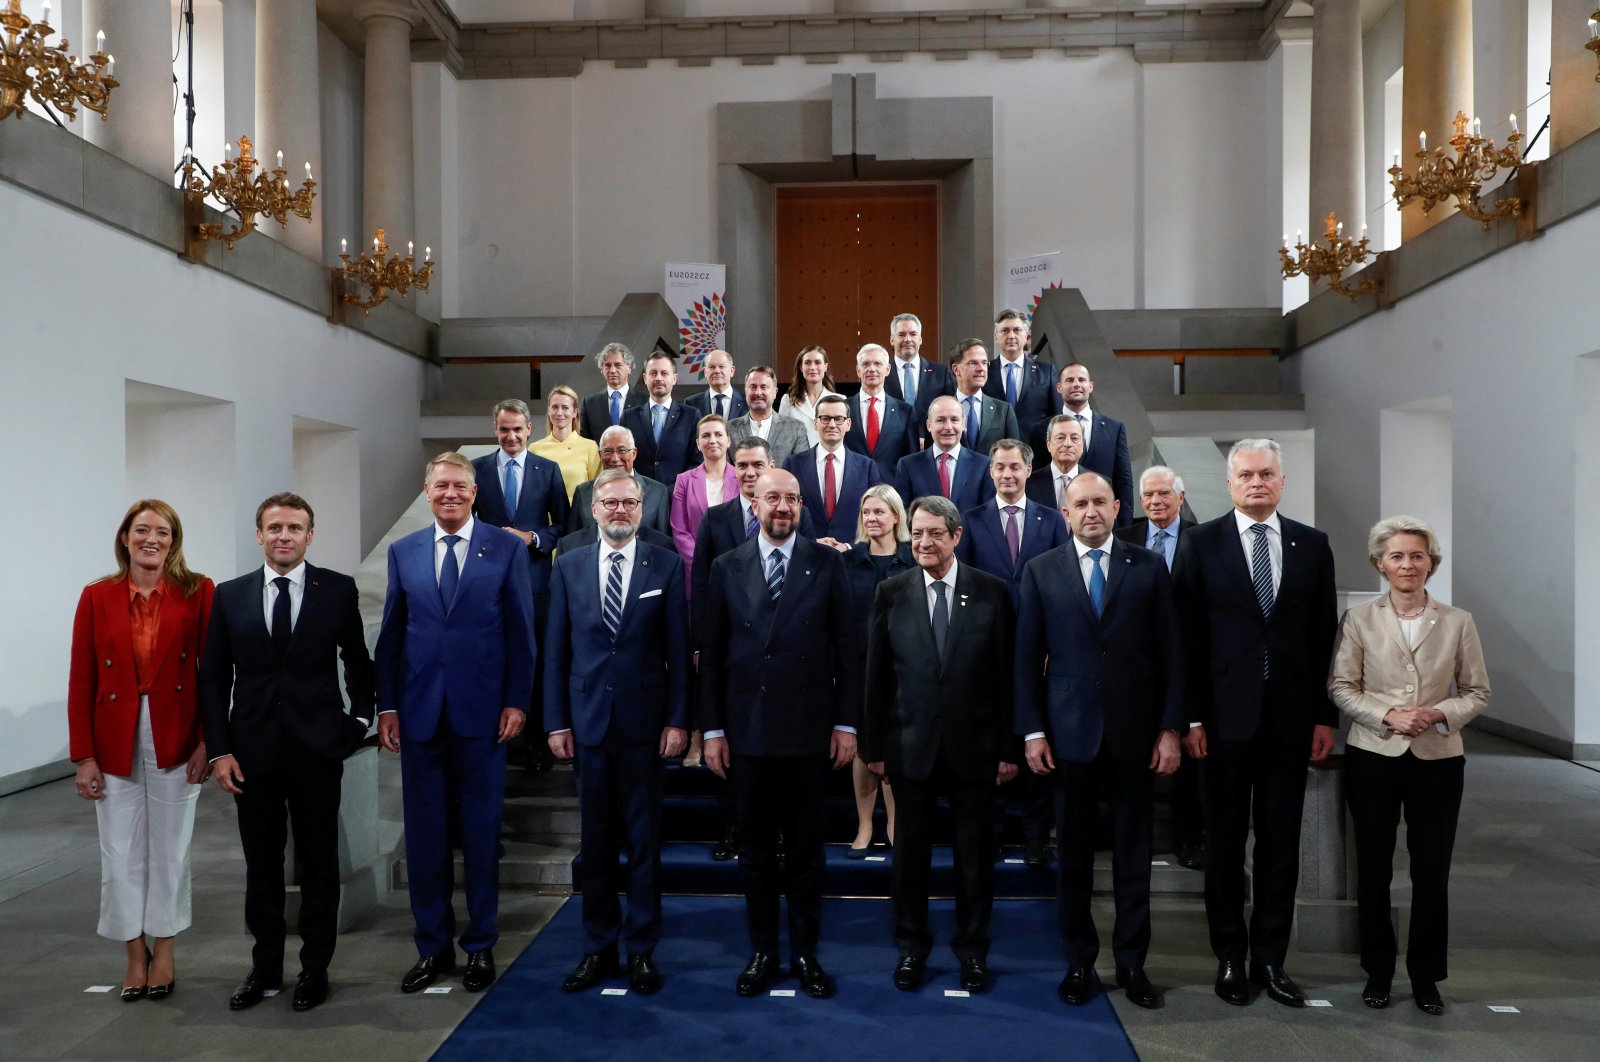 Attendees pose for the group photo during the Informal EU 27 Summit and Meeting within the European Political Community at Prague Castle in Prague, Czech Republic, Oct. 7, 2022. (Reuters Photo)